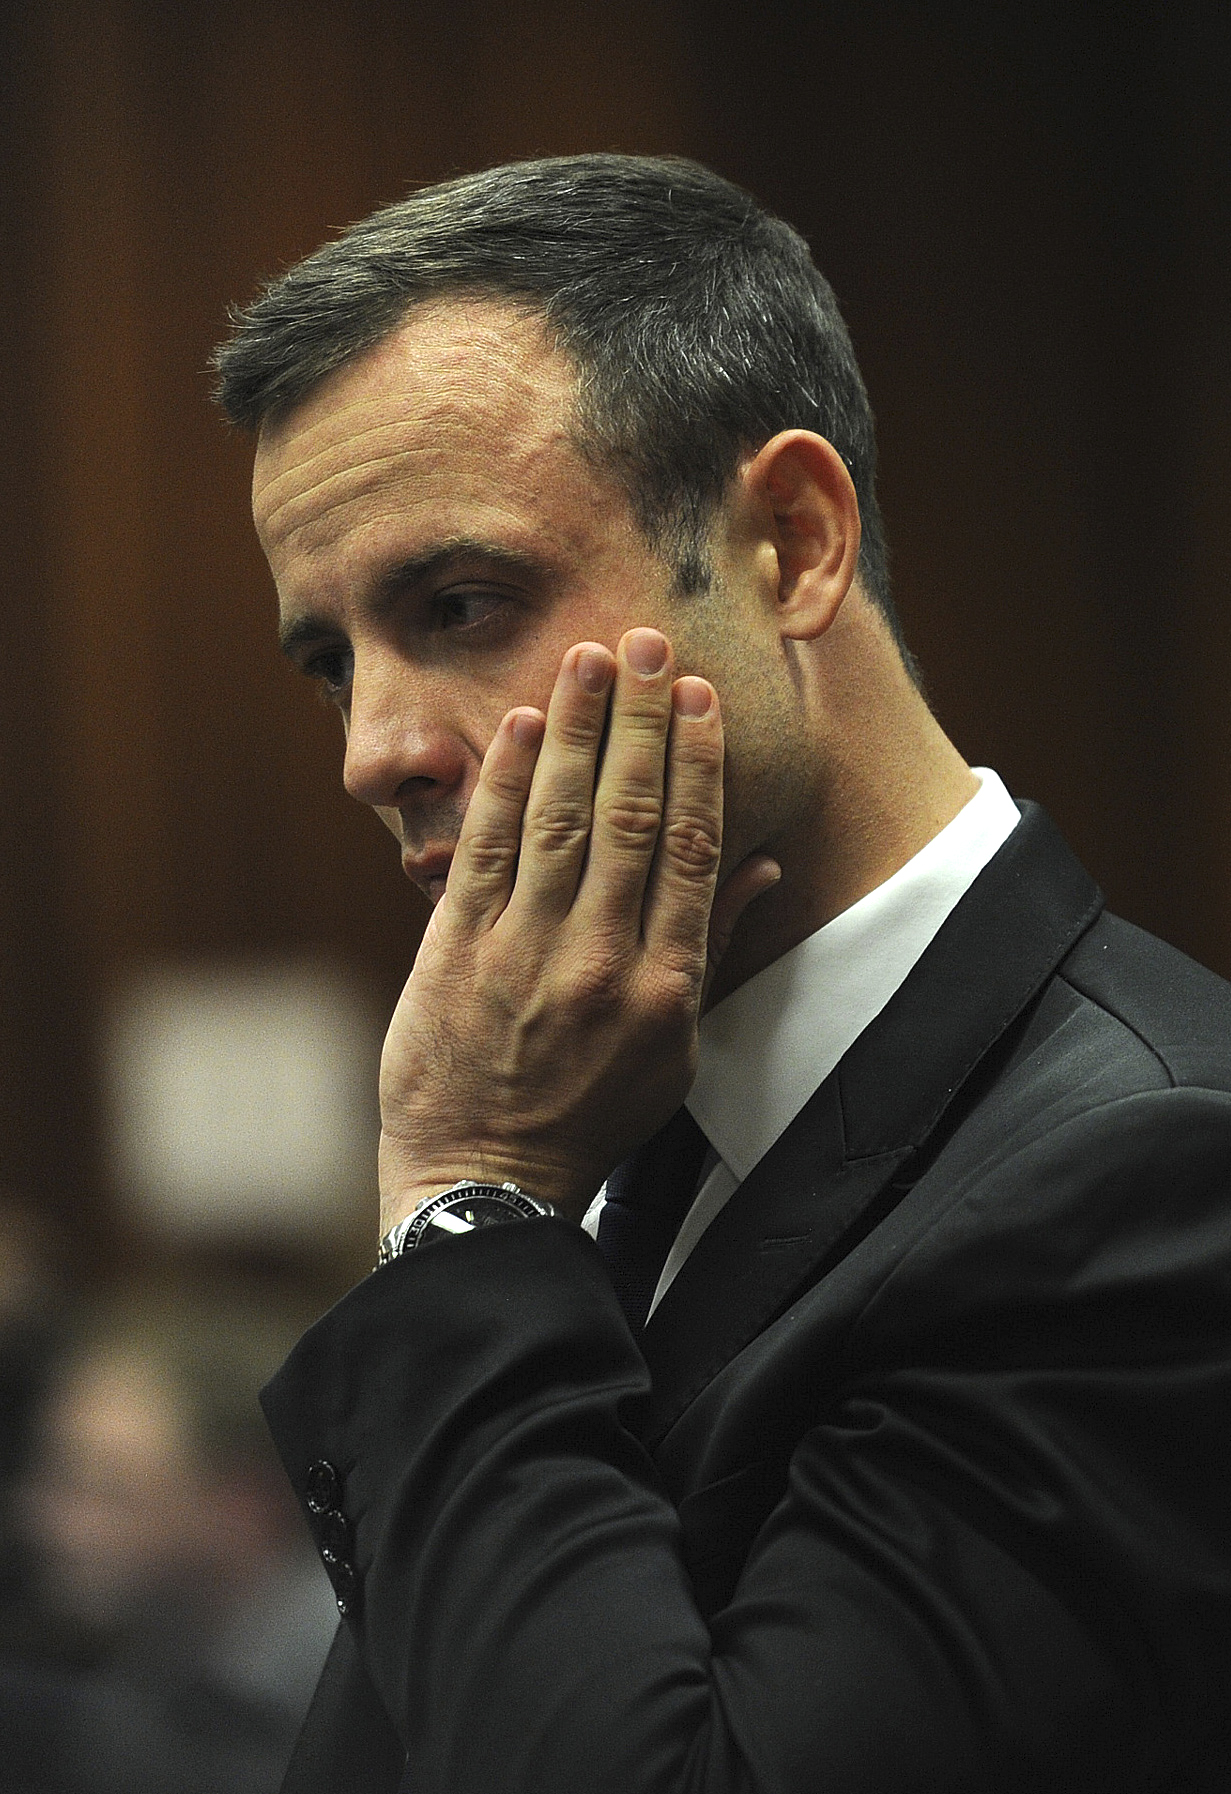 PHOTO: Oscar Pistorius puts his hand to his face in court on the fourth day of his trial at the high court in Pretoria, South Africa, March 6, 2014.  